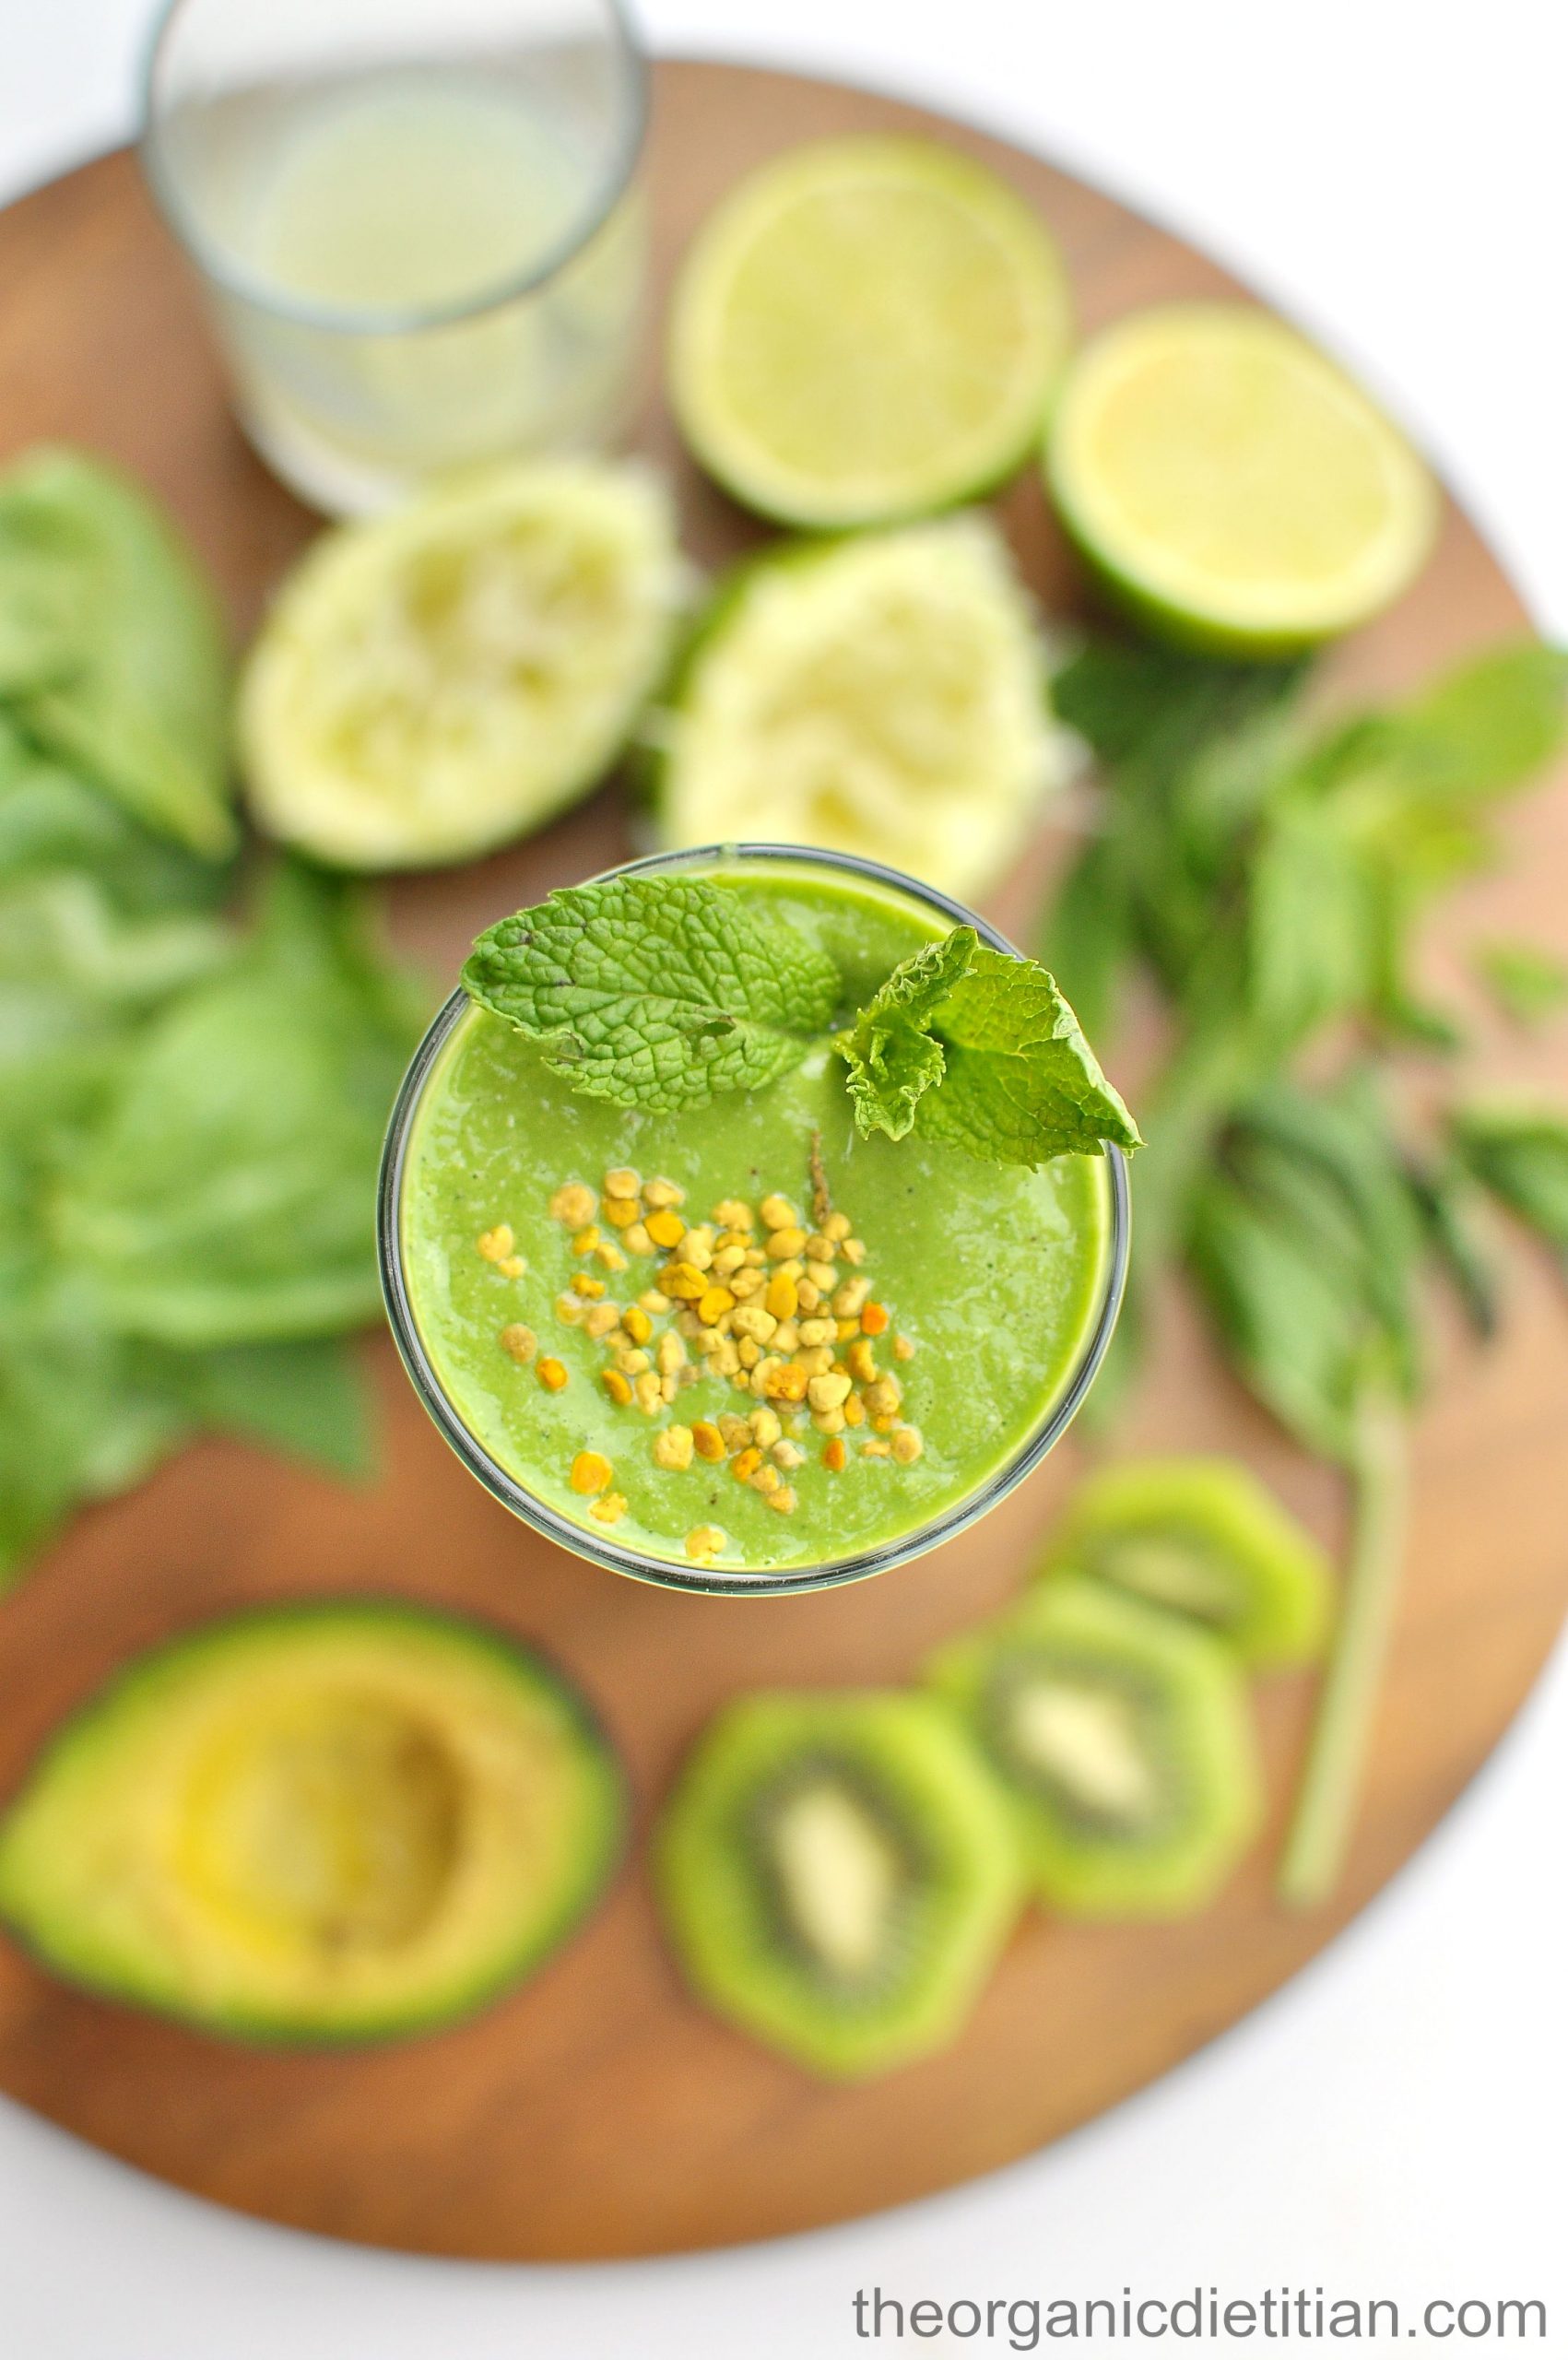 Green Monster Mojito Smoothie - The Organic Dietitian